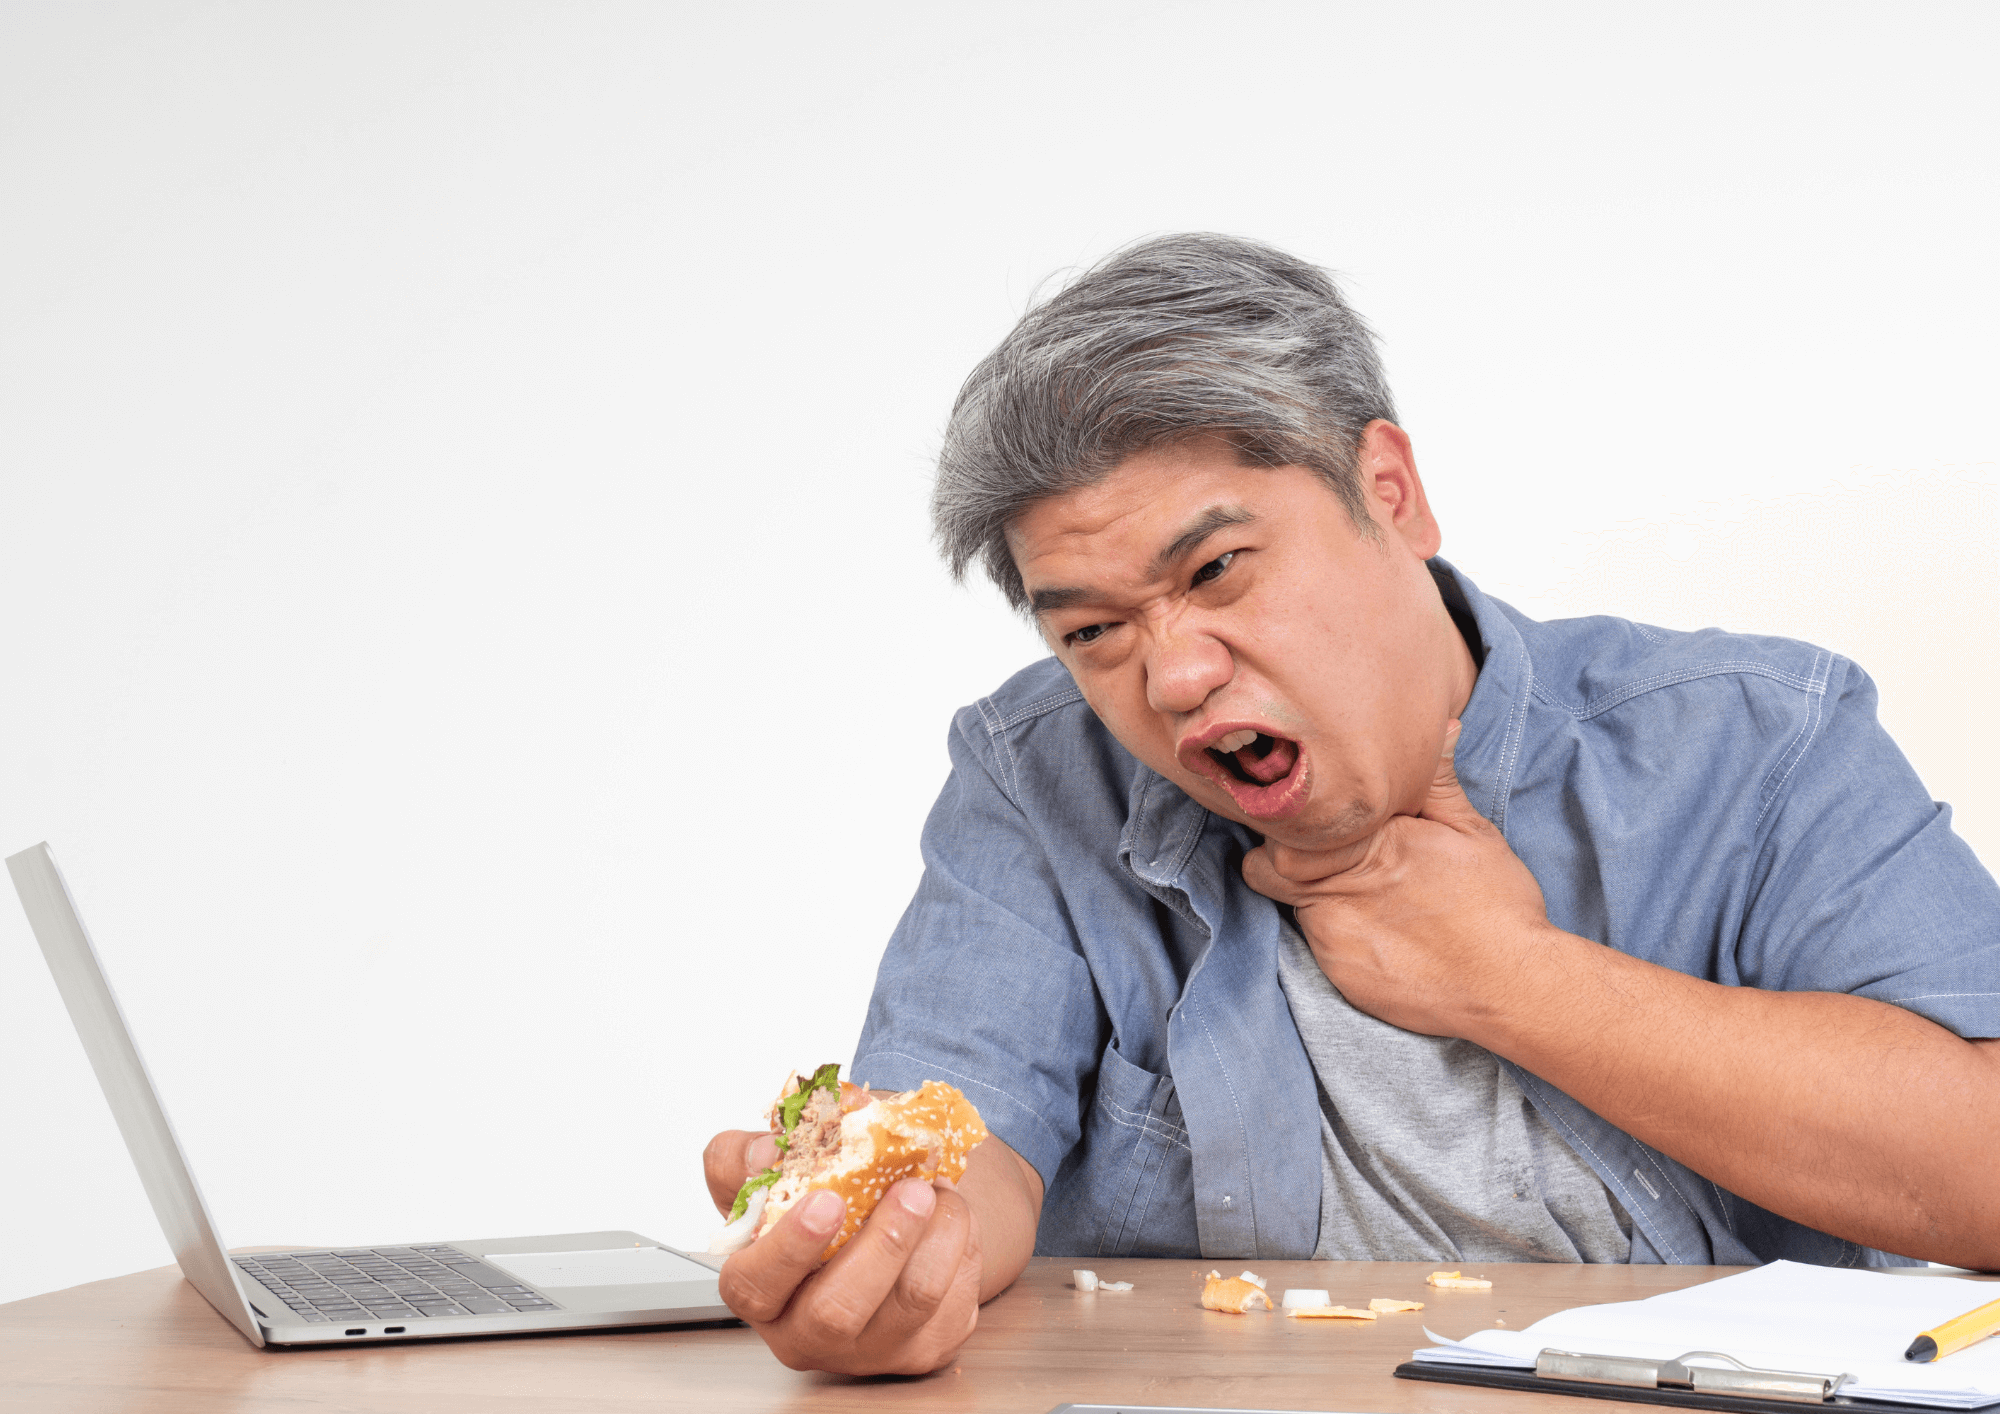 A man at his desk clutches his throat and gasps for air. His other hand still holds the food stuck in his throat: a burger.